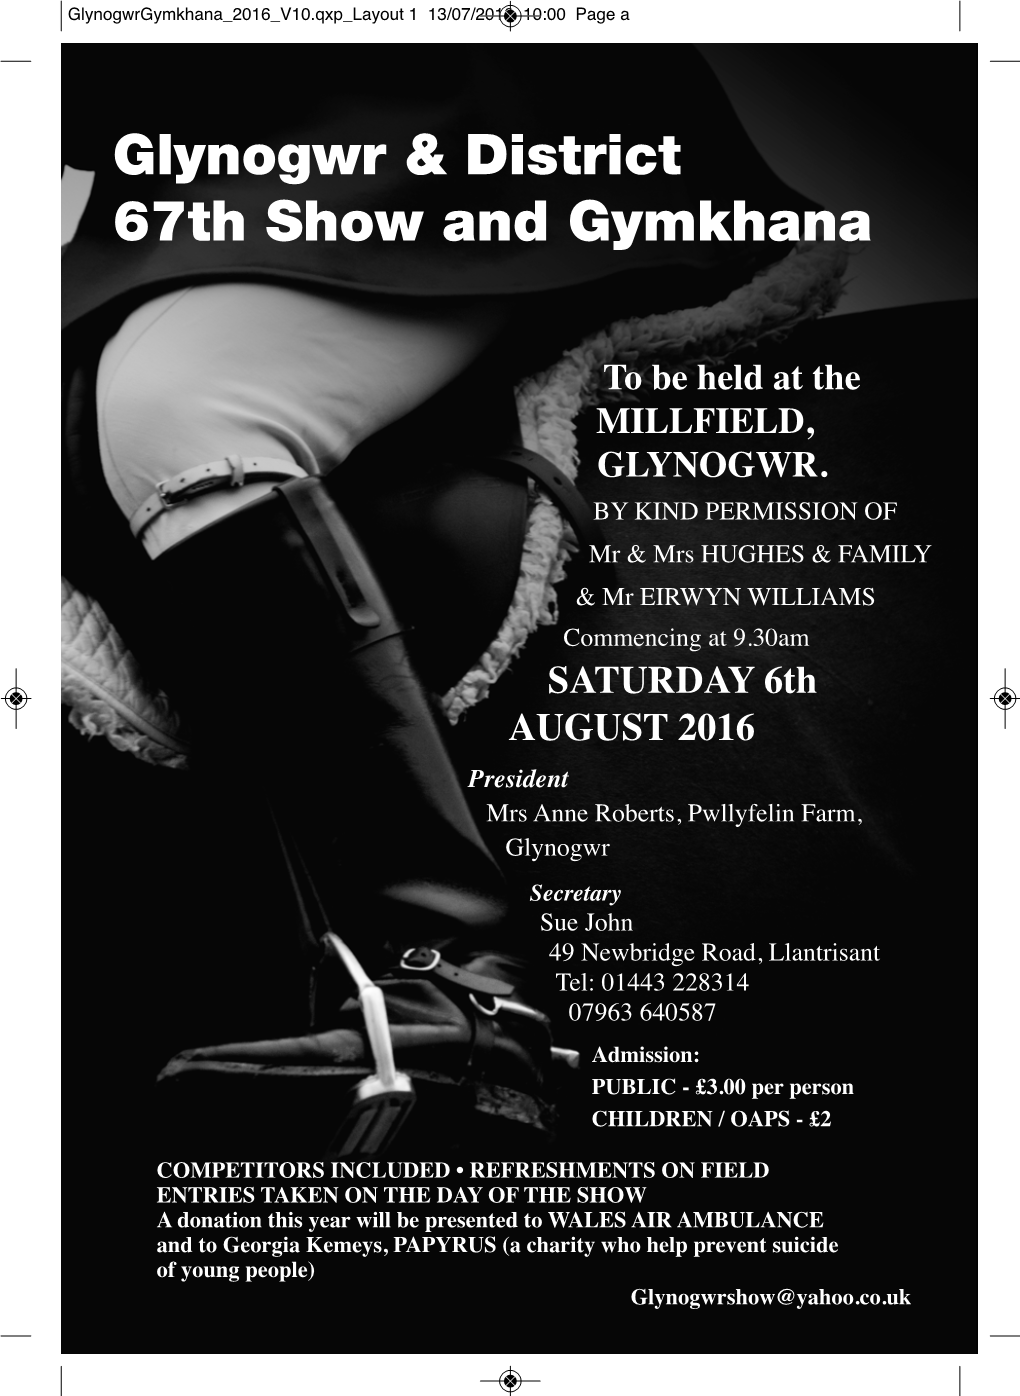 Glynogwr & District 67Th Show and Gymkhana